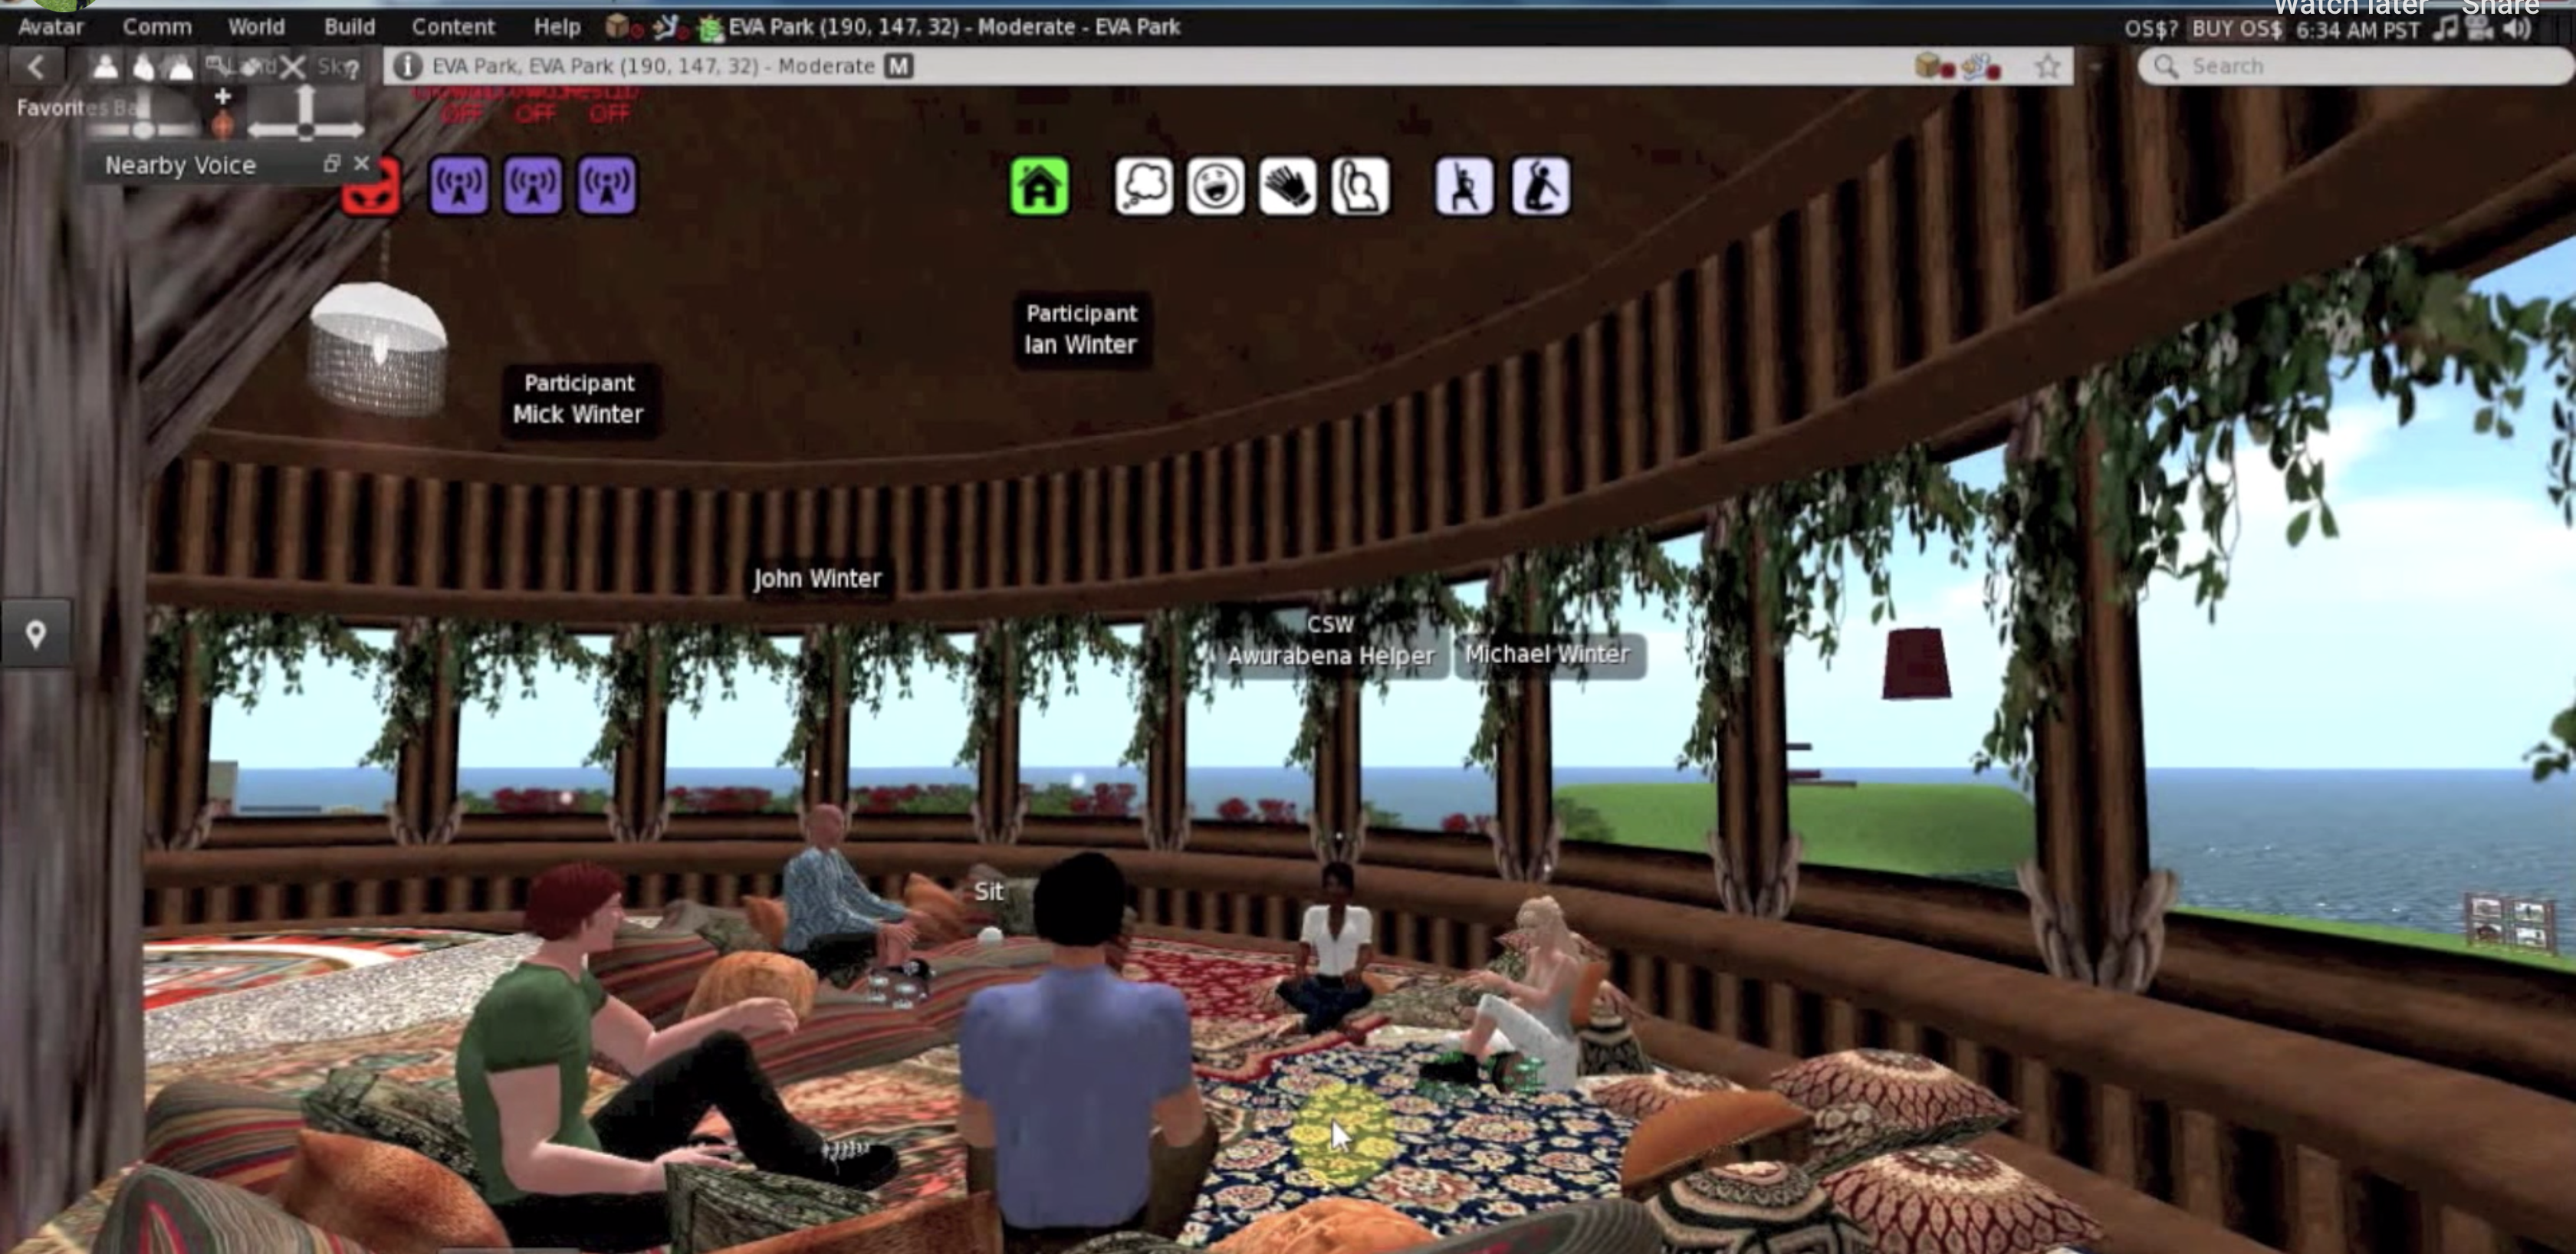 Screenshot from Eva Park virtual world. It shows a collection of avatars sitting in a tree house.